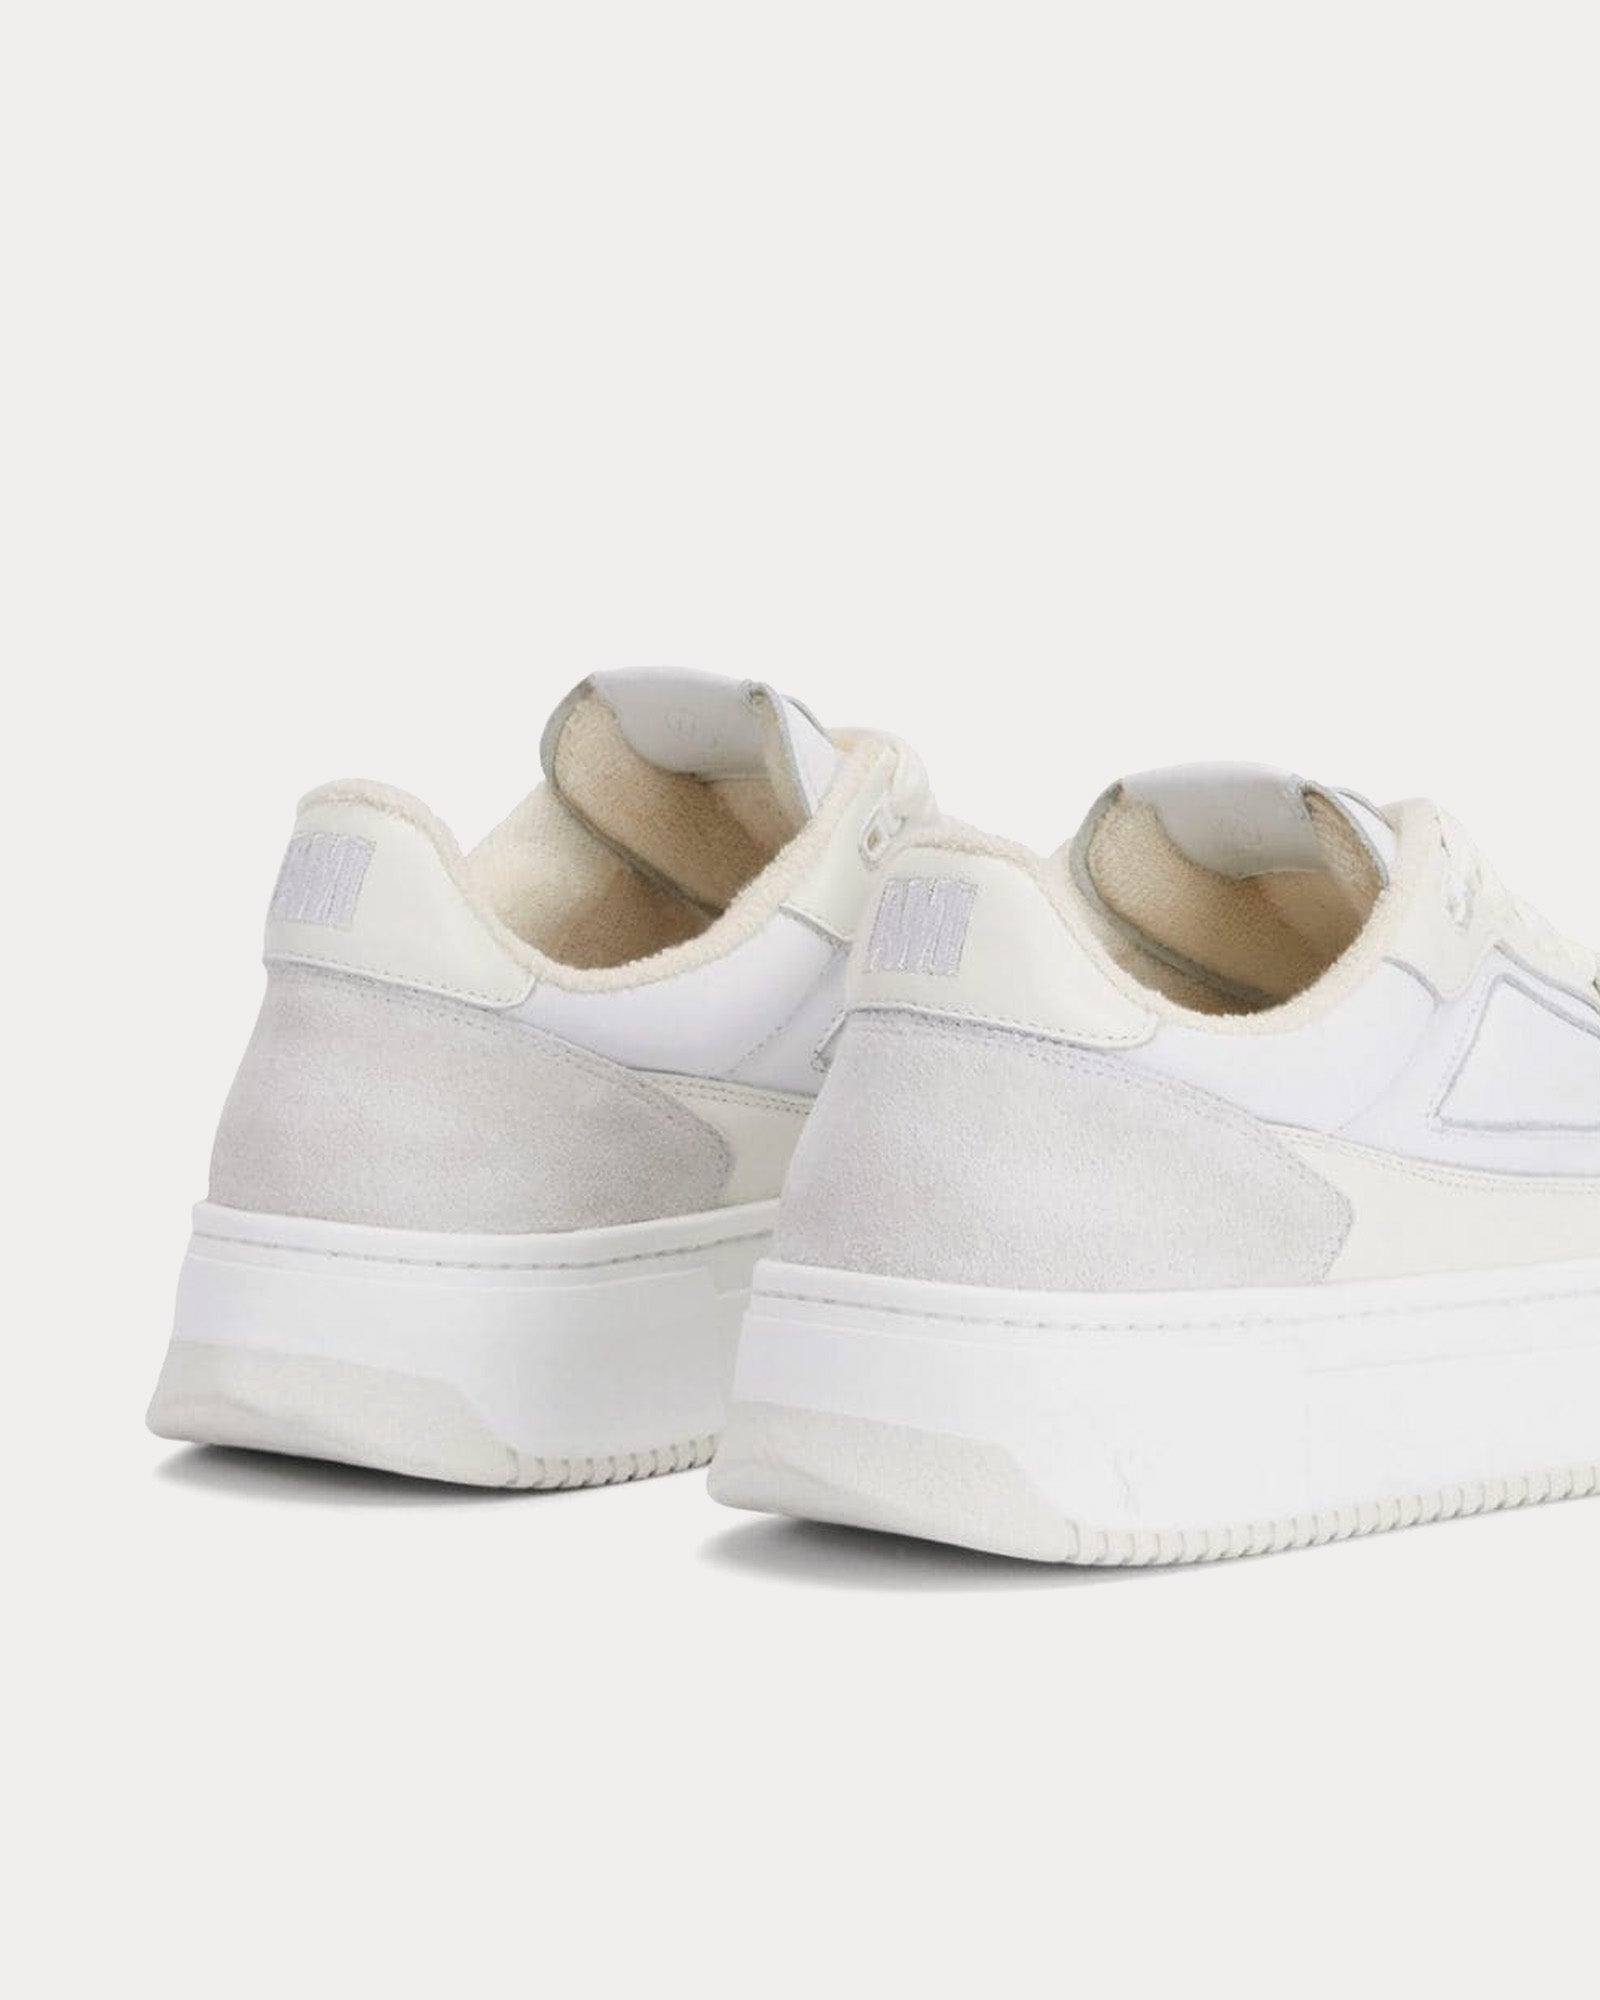 AMI - Arcade Leather White Low Top Sneakers